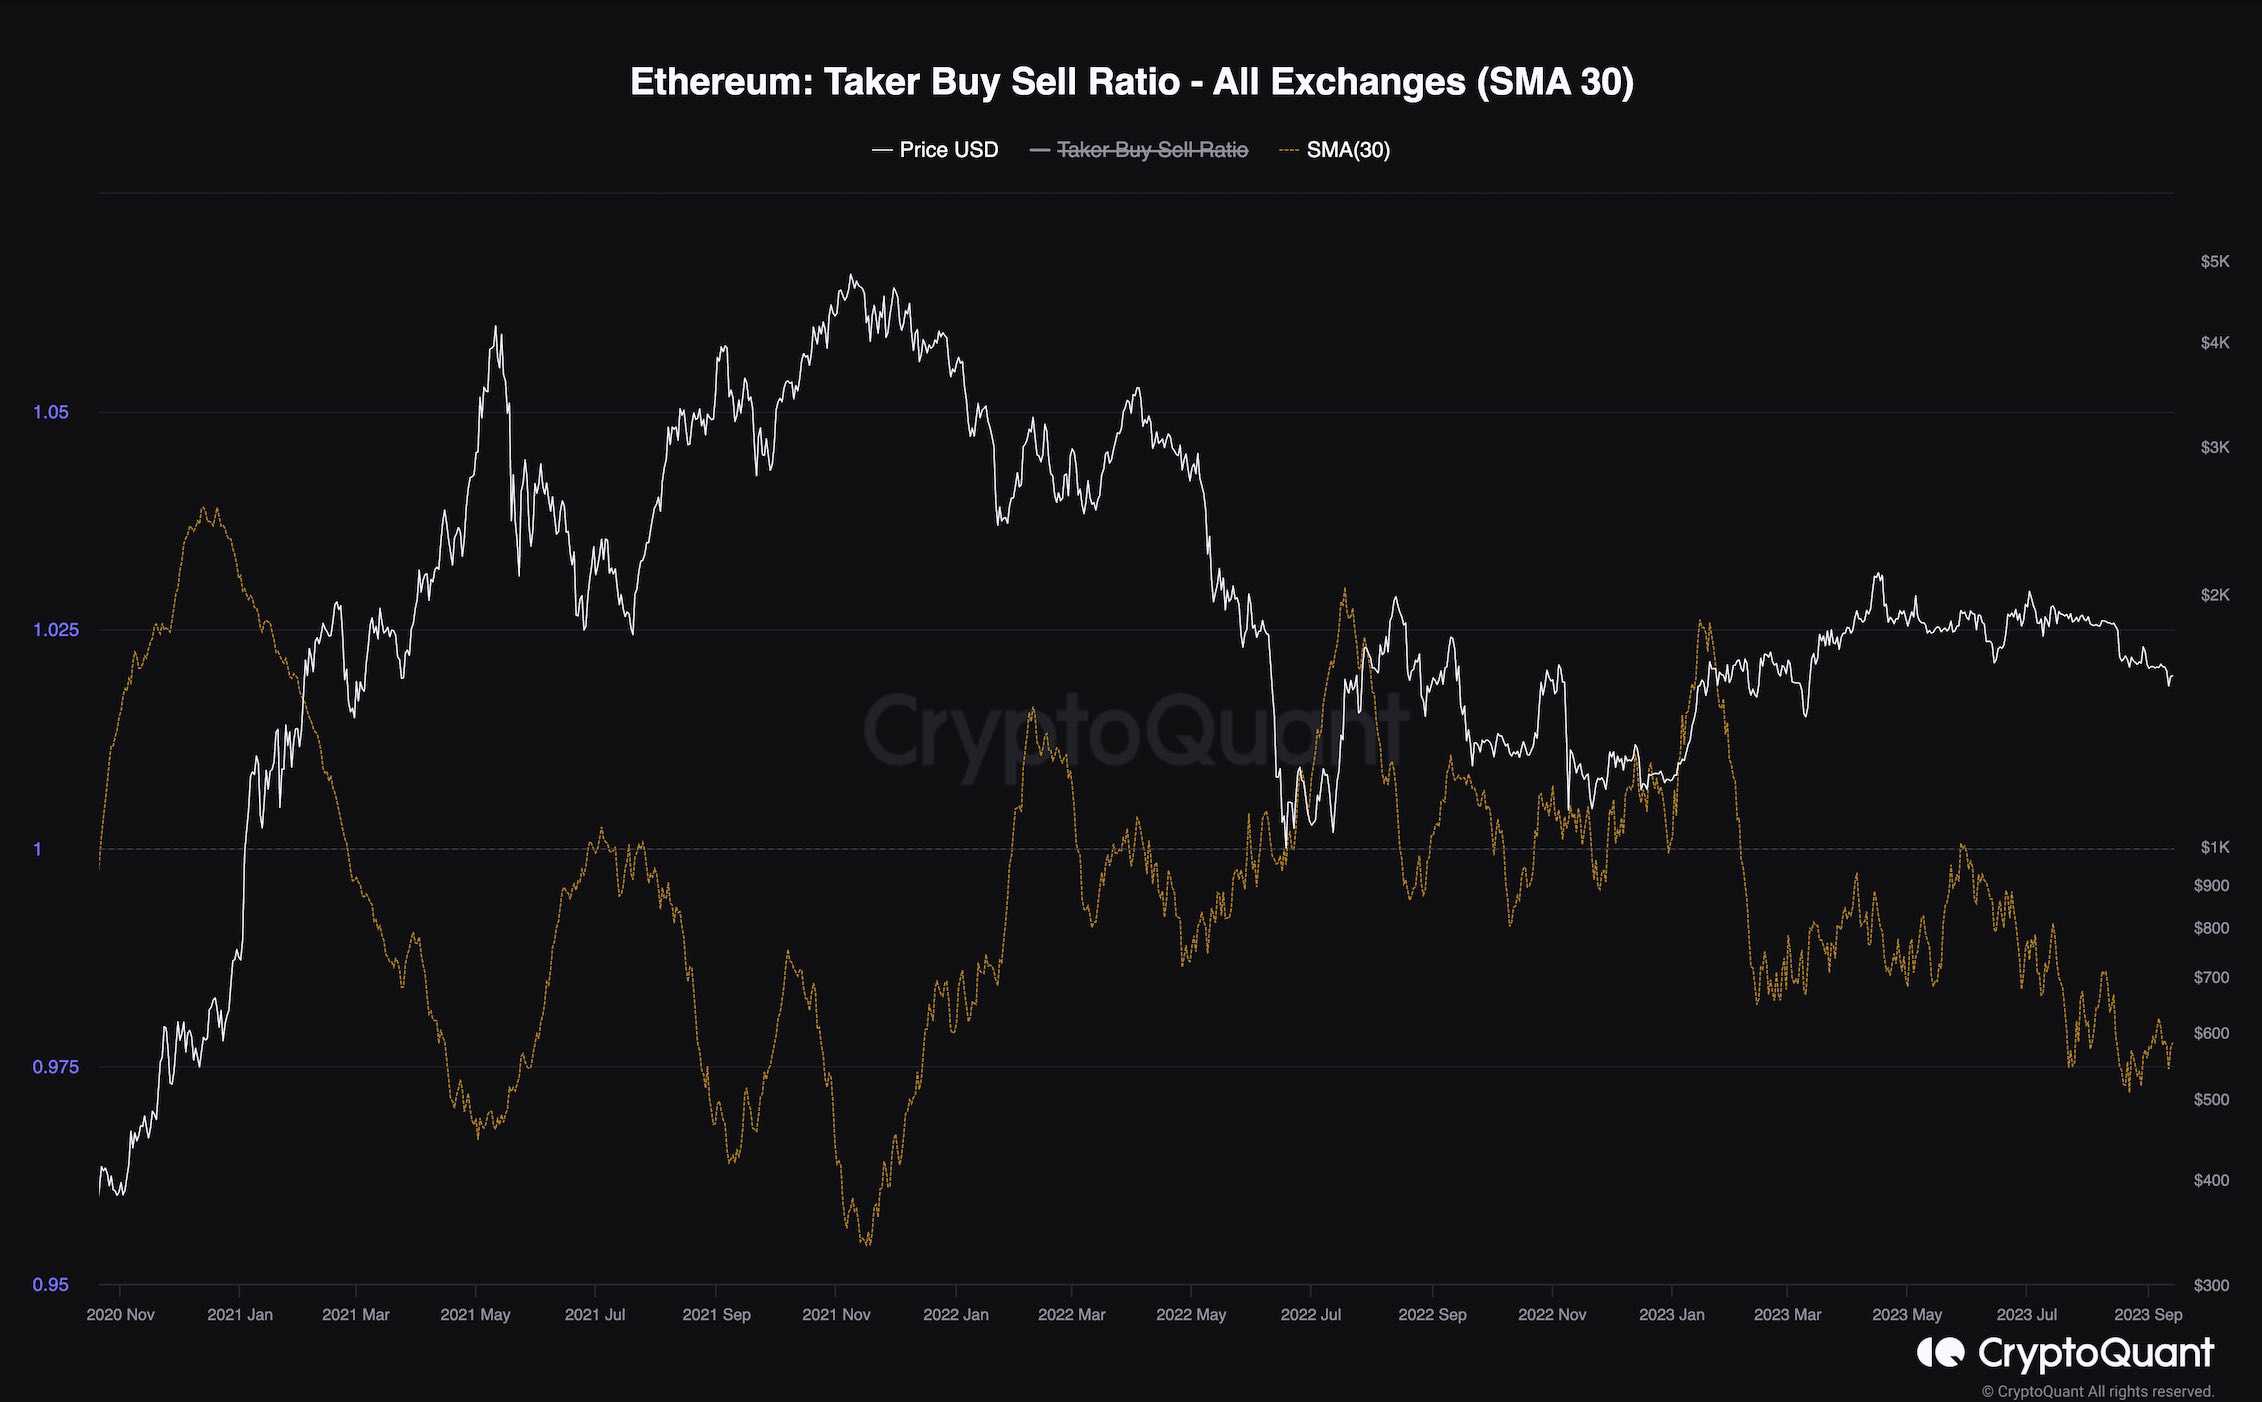 eth_taker_buy_sell_ratio_chart_1309231